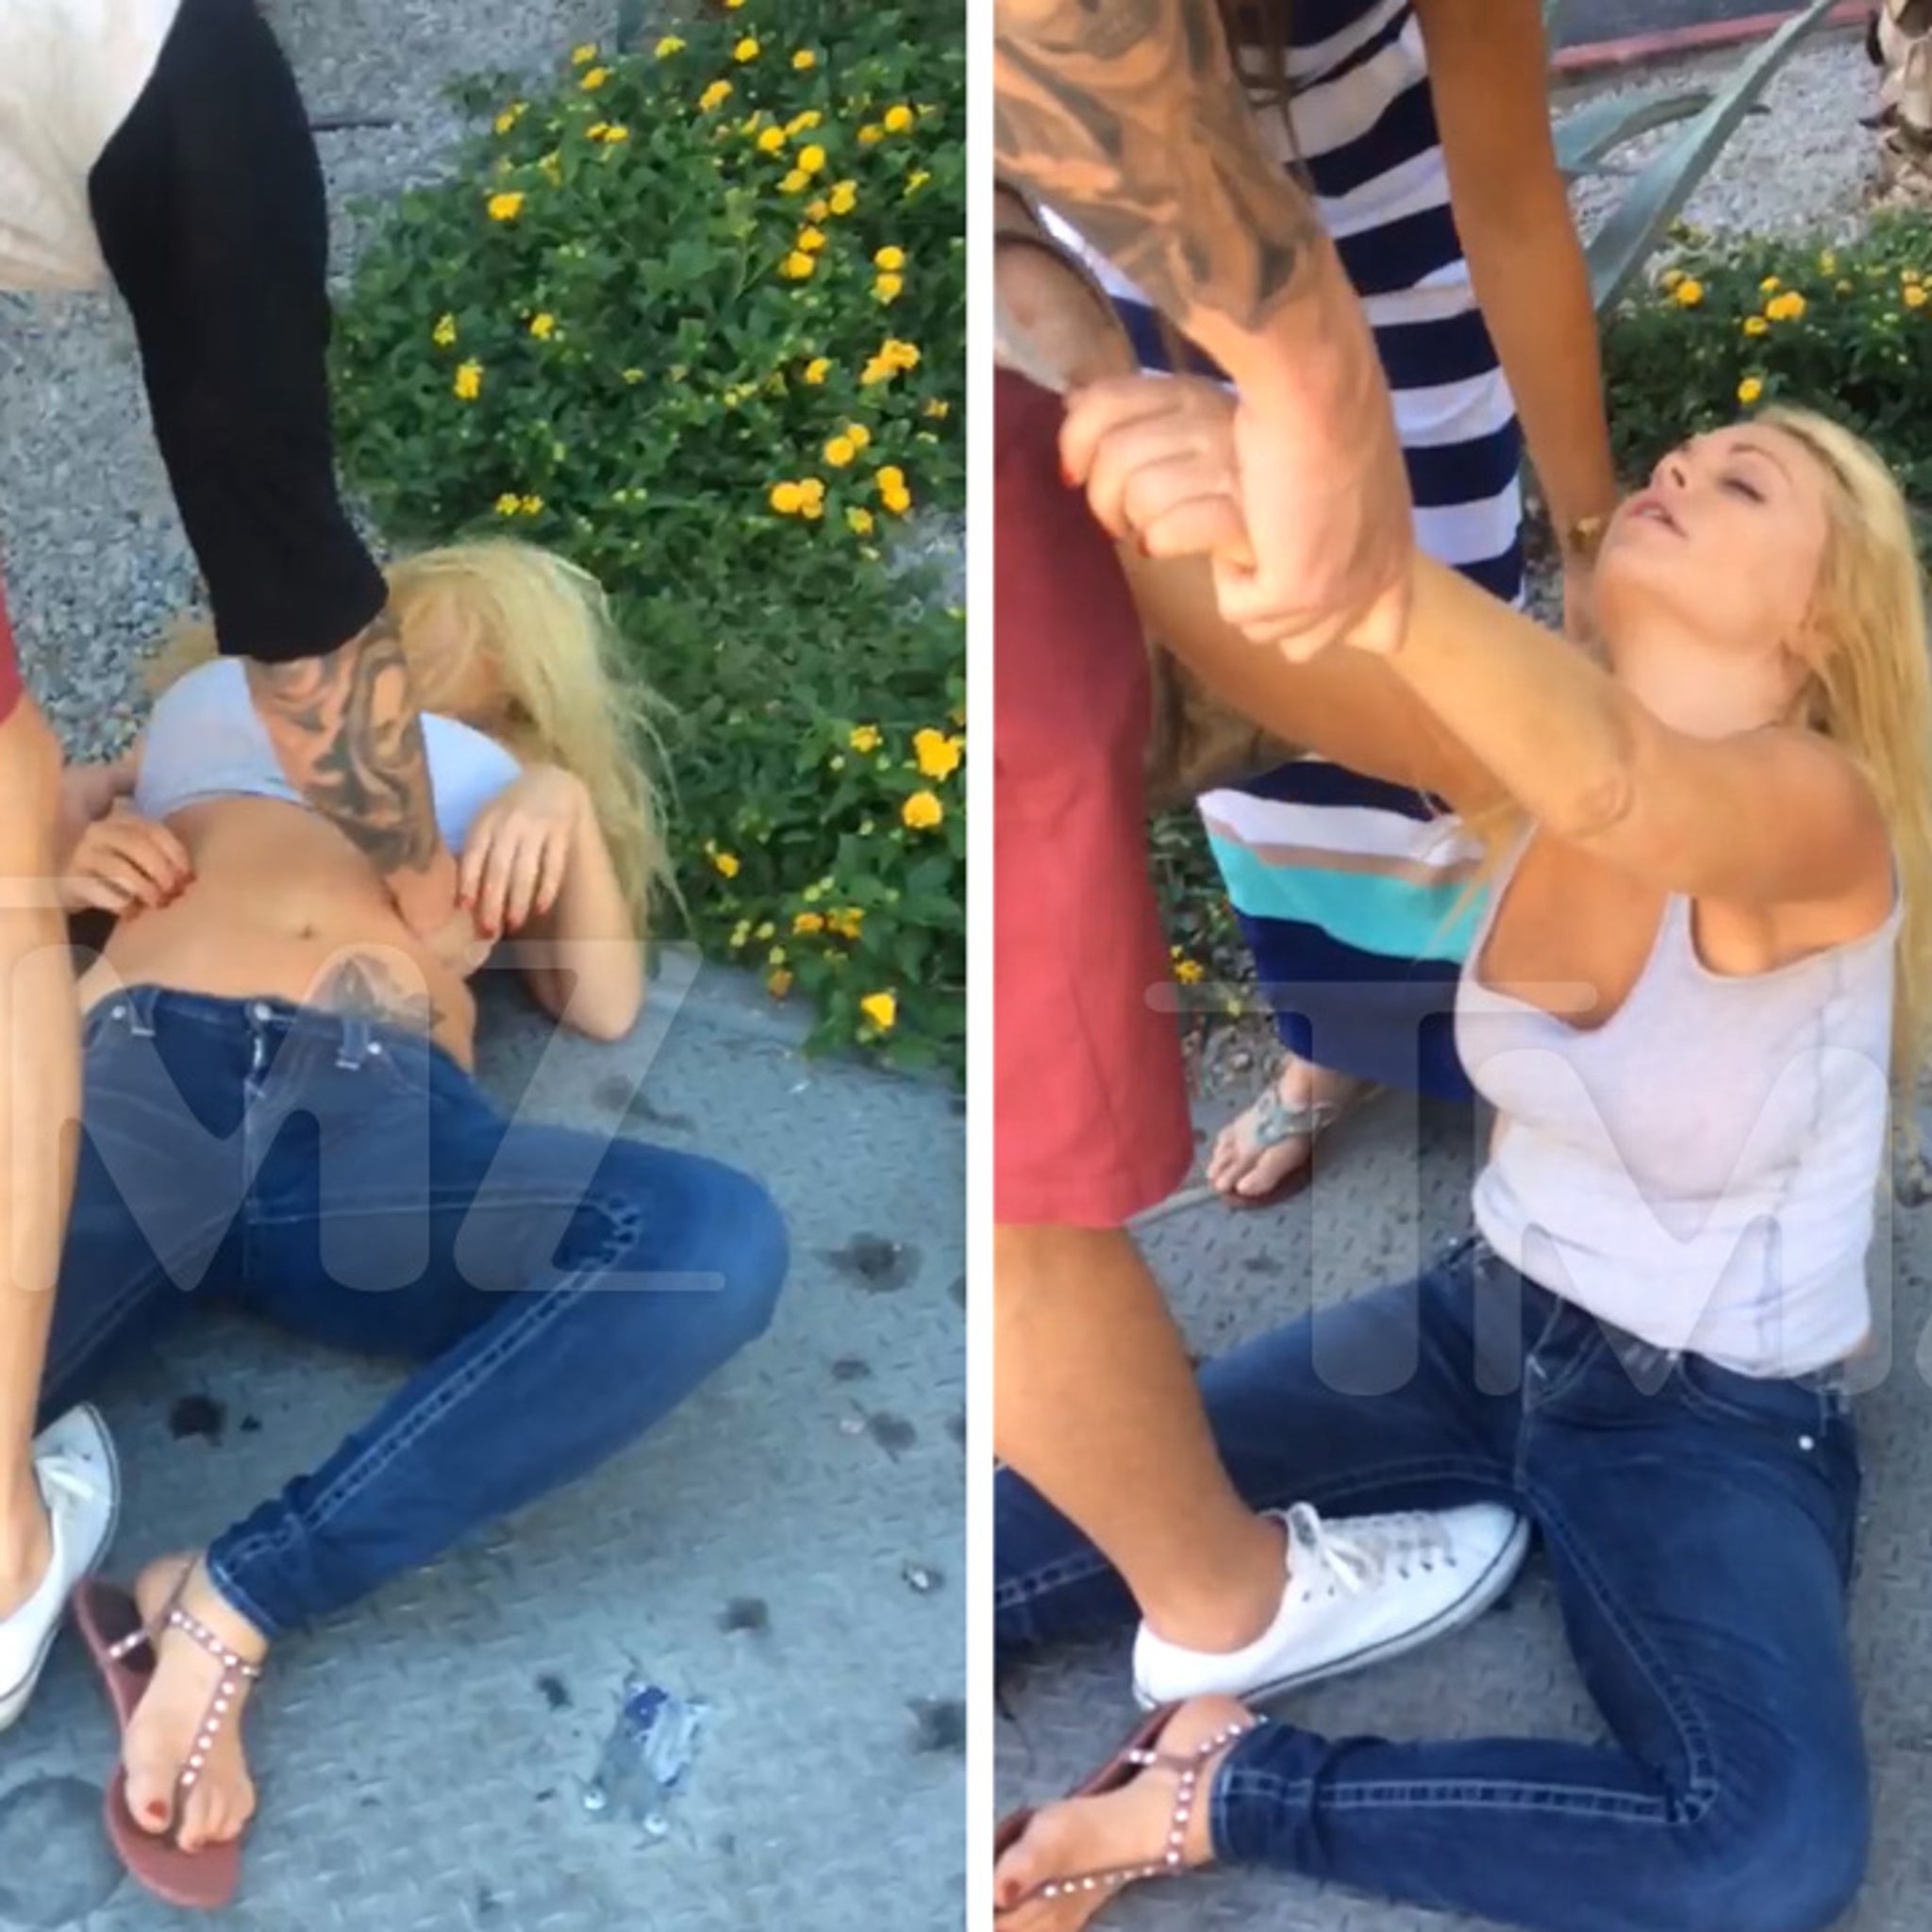 Porn Star Jesse Jane -- Passed OUT COLD On the Vegas Strip! (VIDEO)